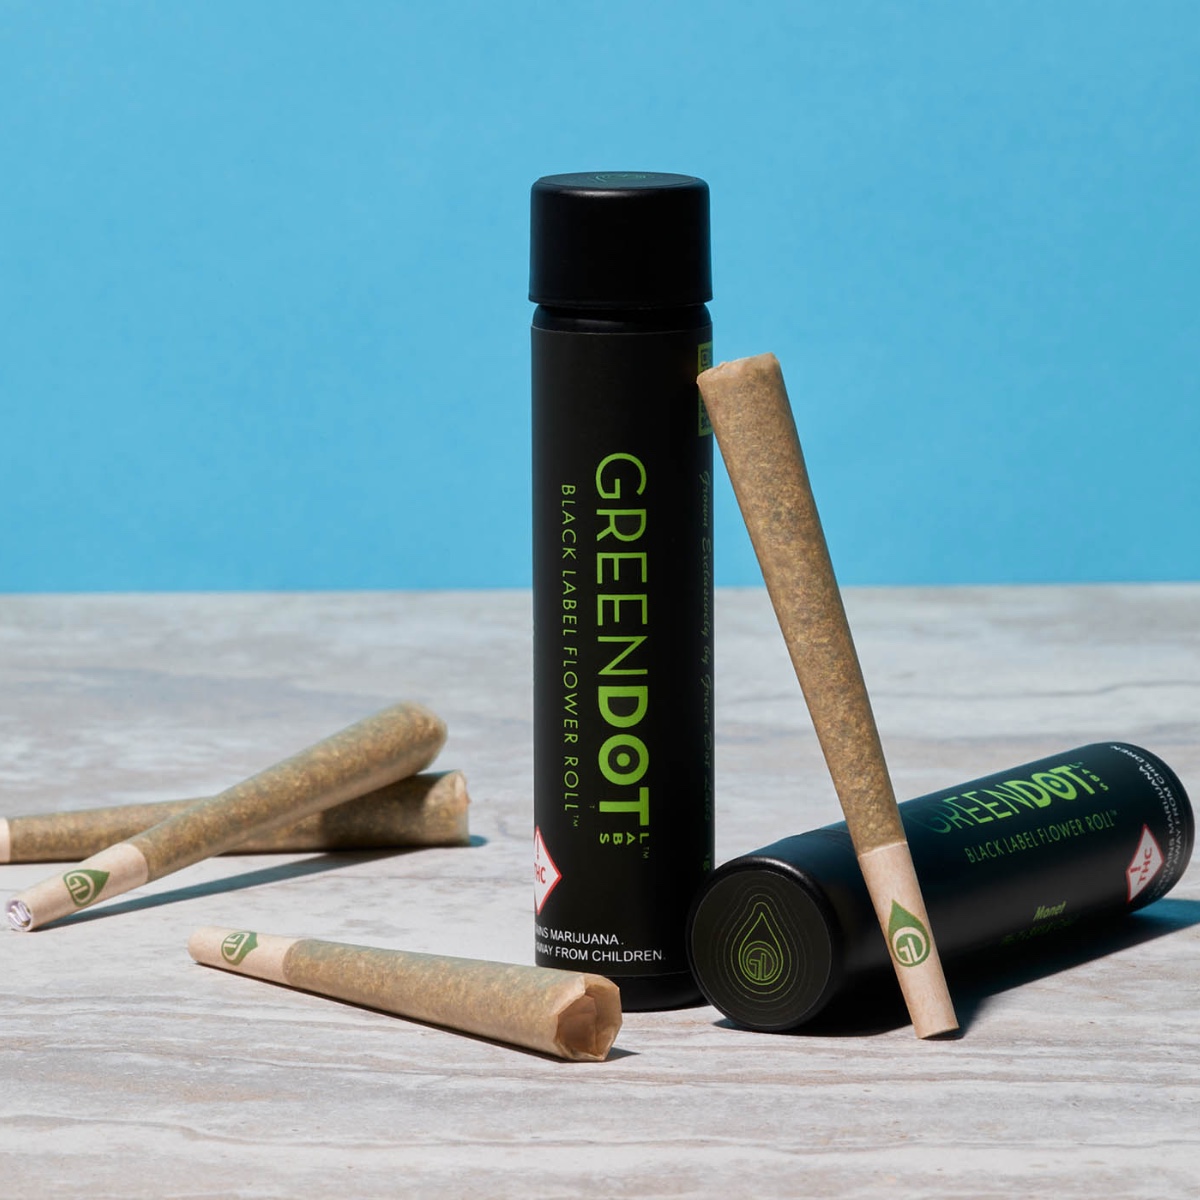 Unlock the essence of relaxation with Green Dot's natural touch 🍃💆‍♂️ @GreenDotLabs 

#greendot #relax #thecenter